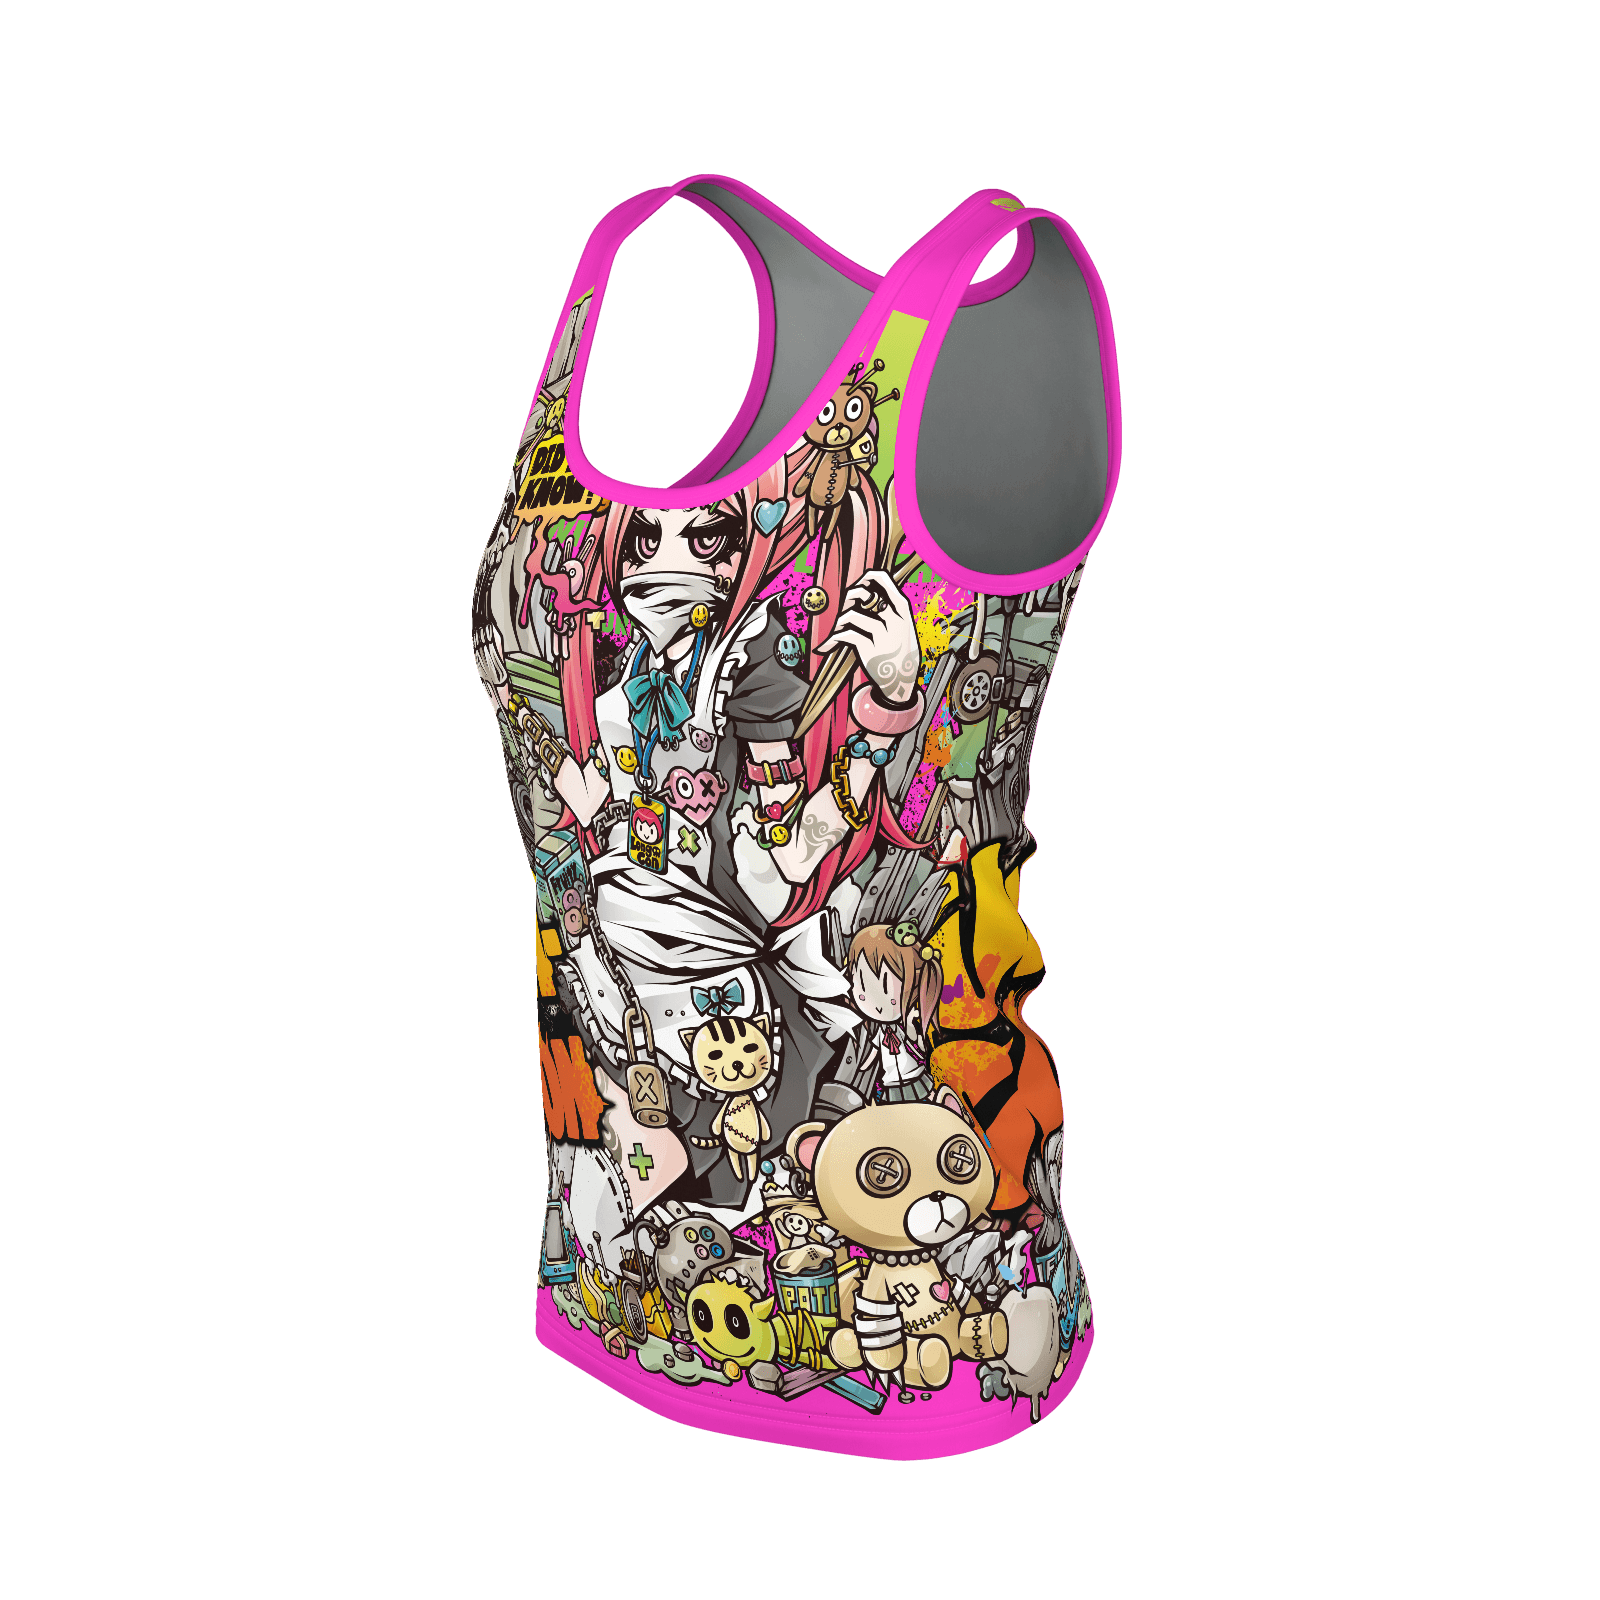 PROJECT.C.K. - Uncon (Tank, Woman, Pink) POLY 2019